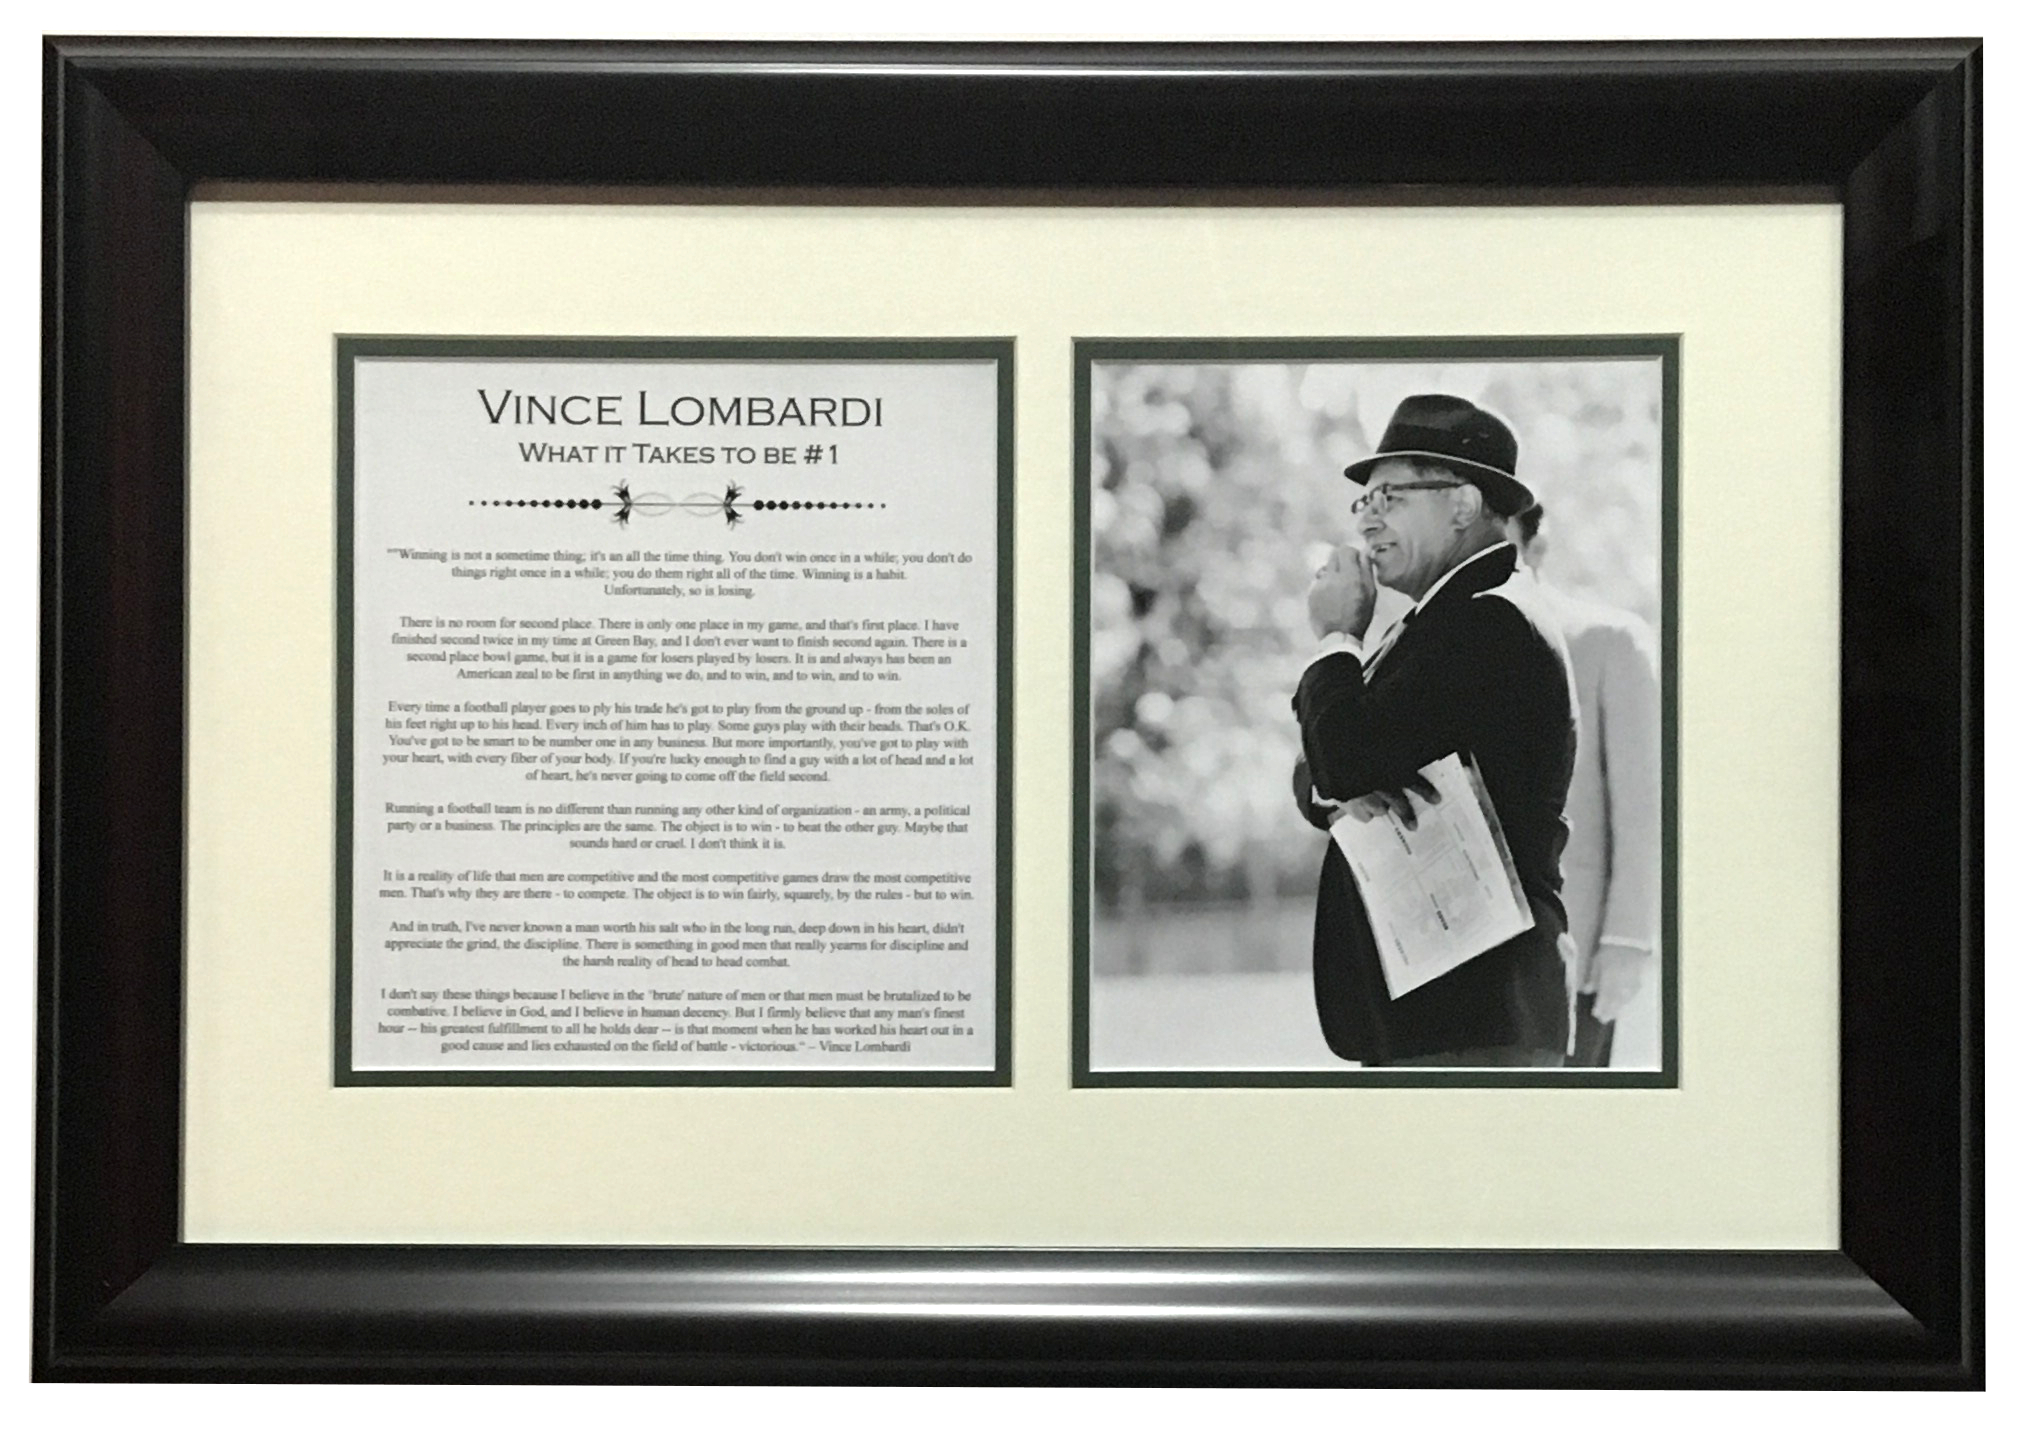 Vince Lombardi Packers hof coach Photo framed Speech What It Takes To Be #1